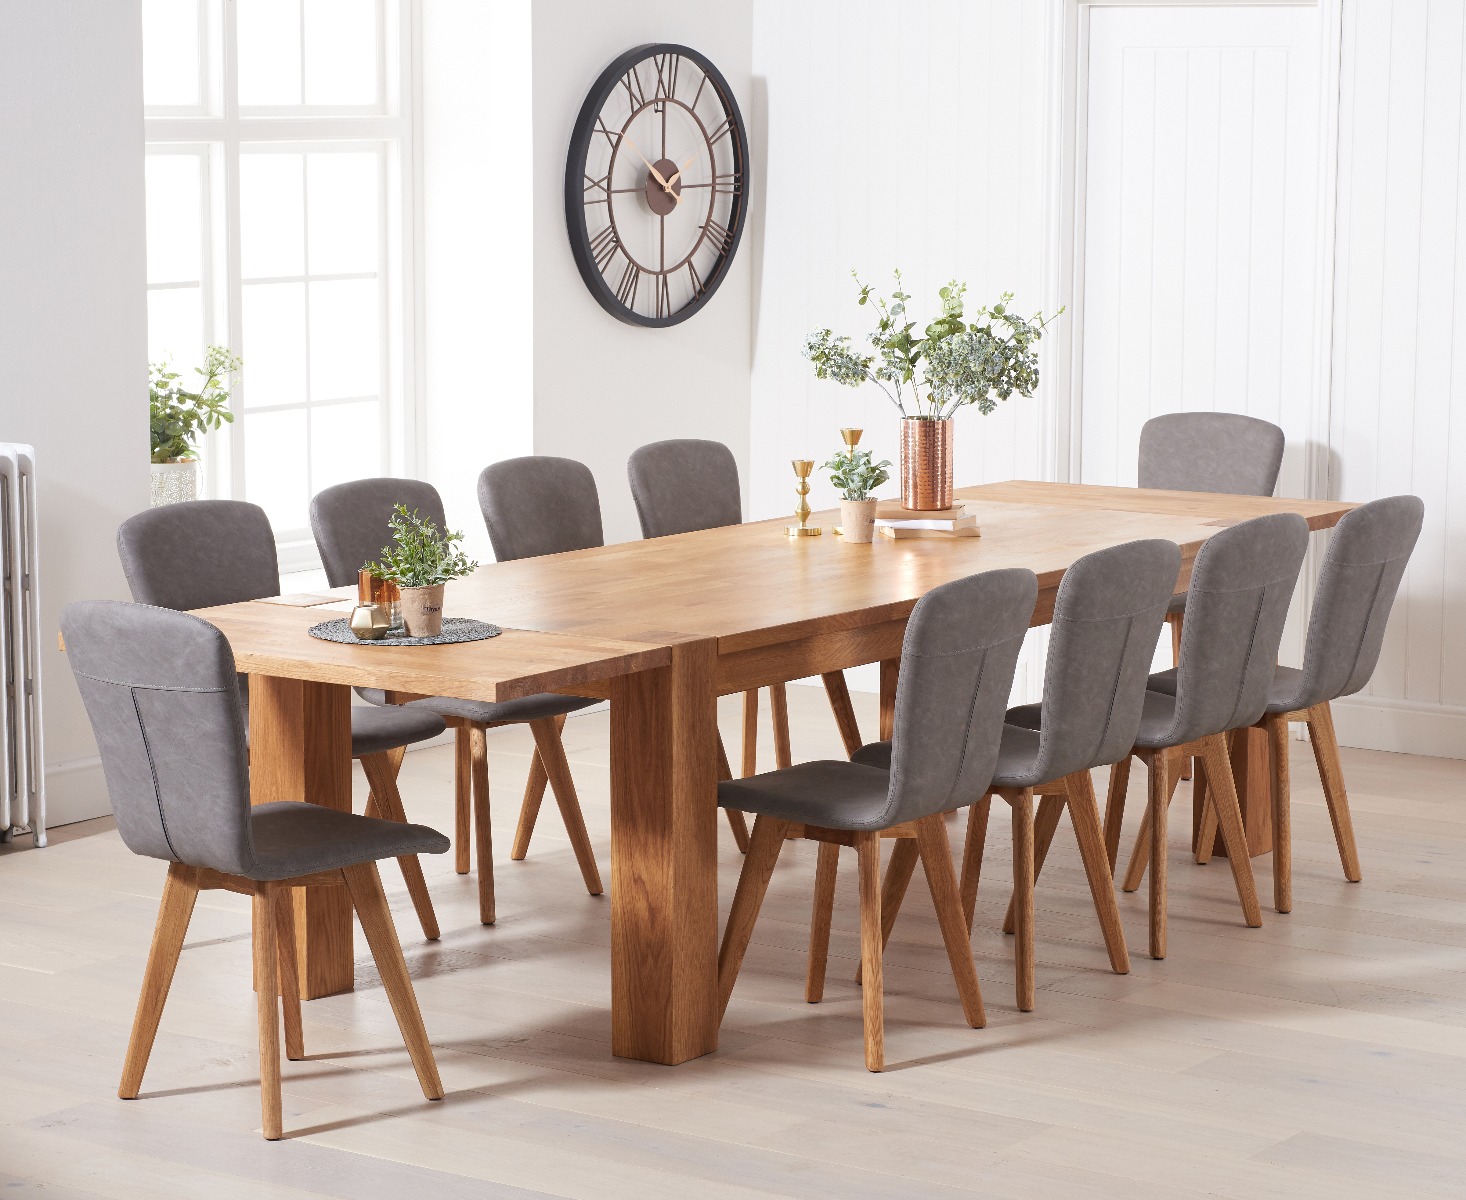 Extending Sheringham 240cm Solid Oak Table With 12 Grey Ruben Faux Leather Chairs